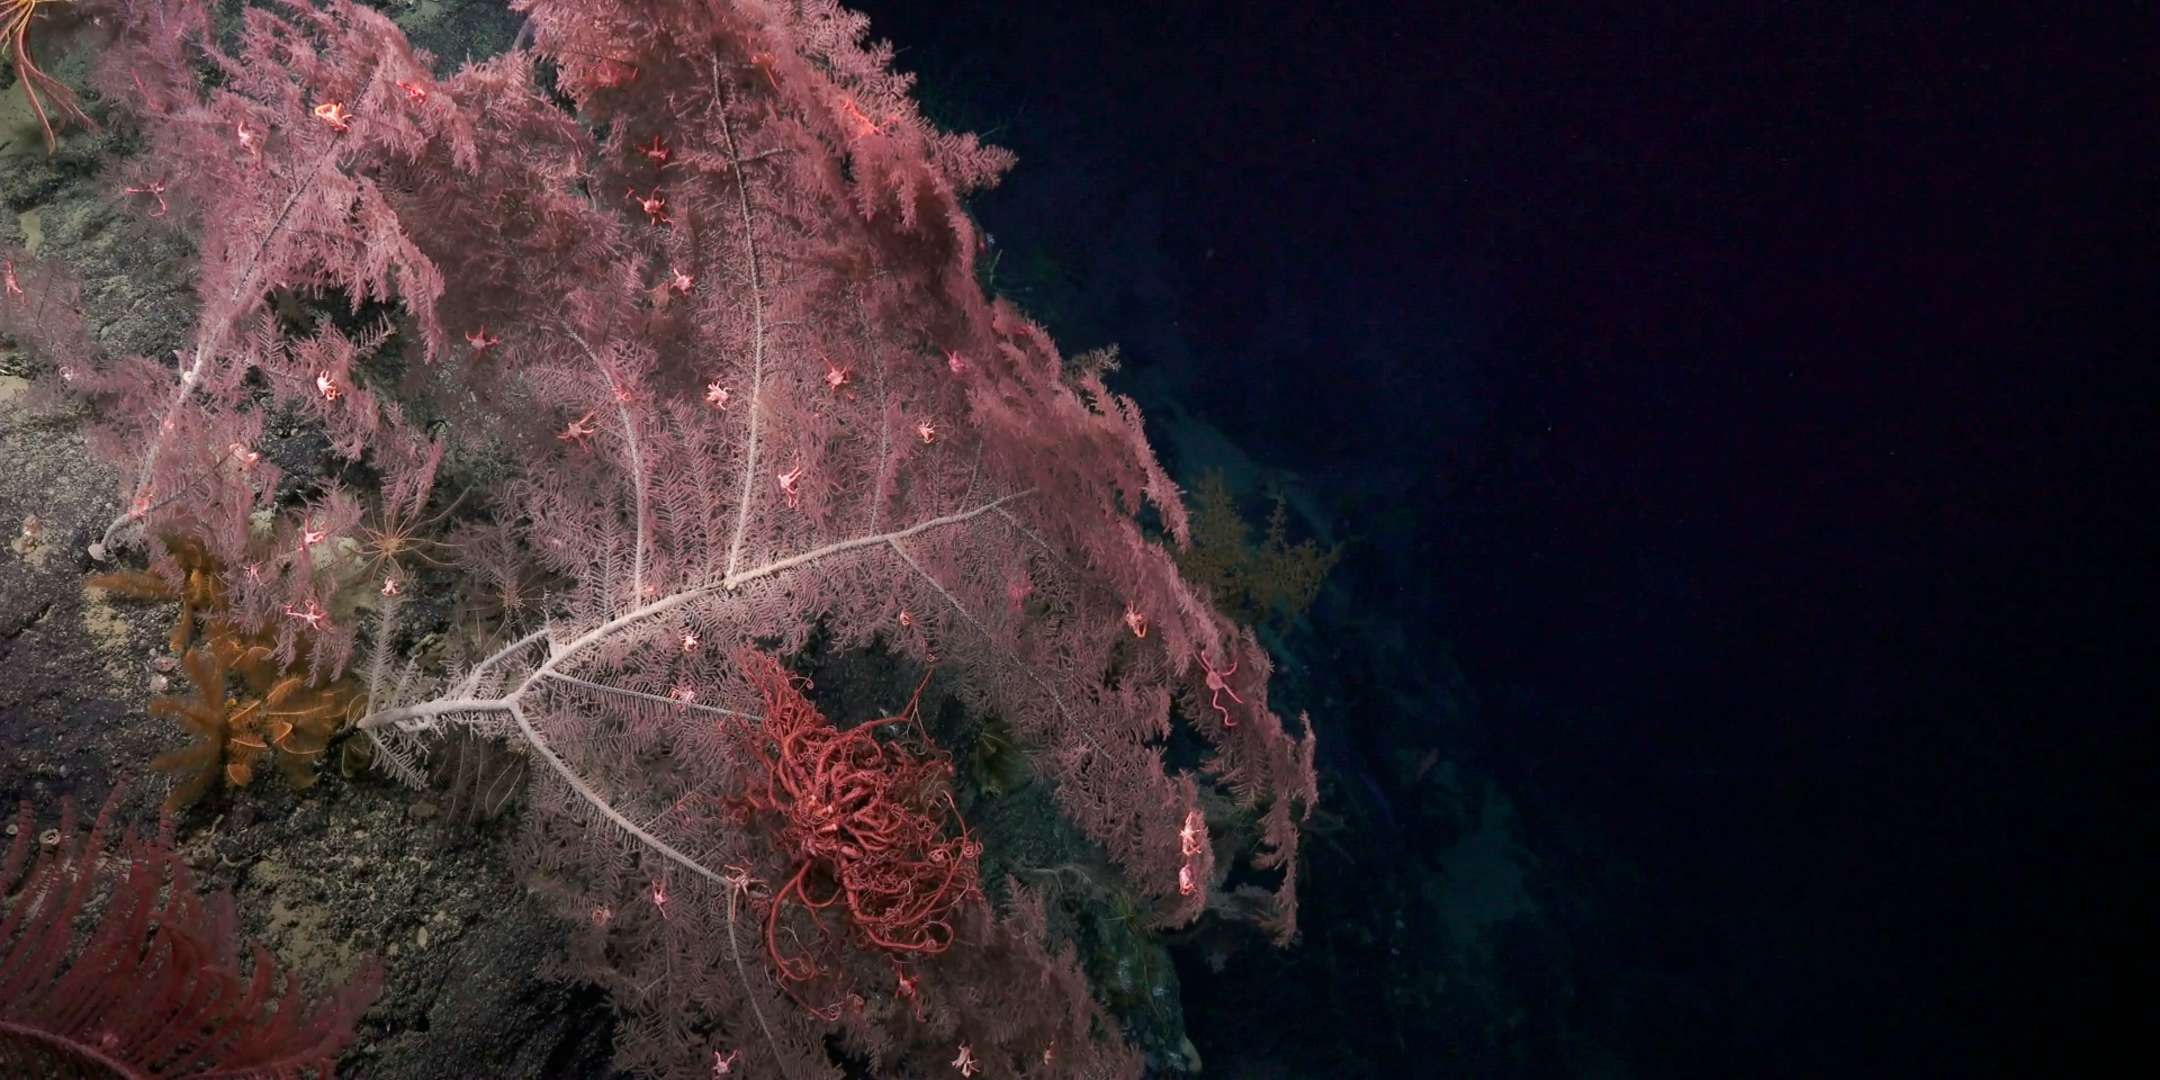 Large coral with associates. Image courtesy Schmidt Ocean Institute